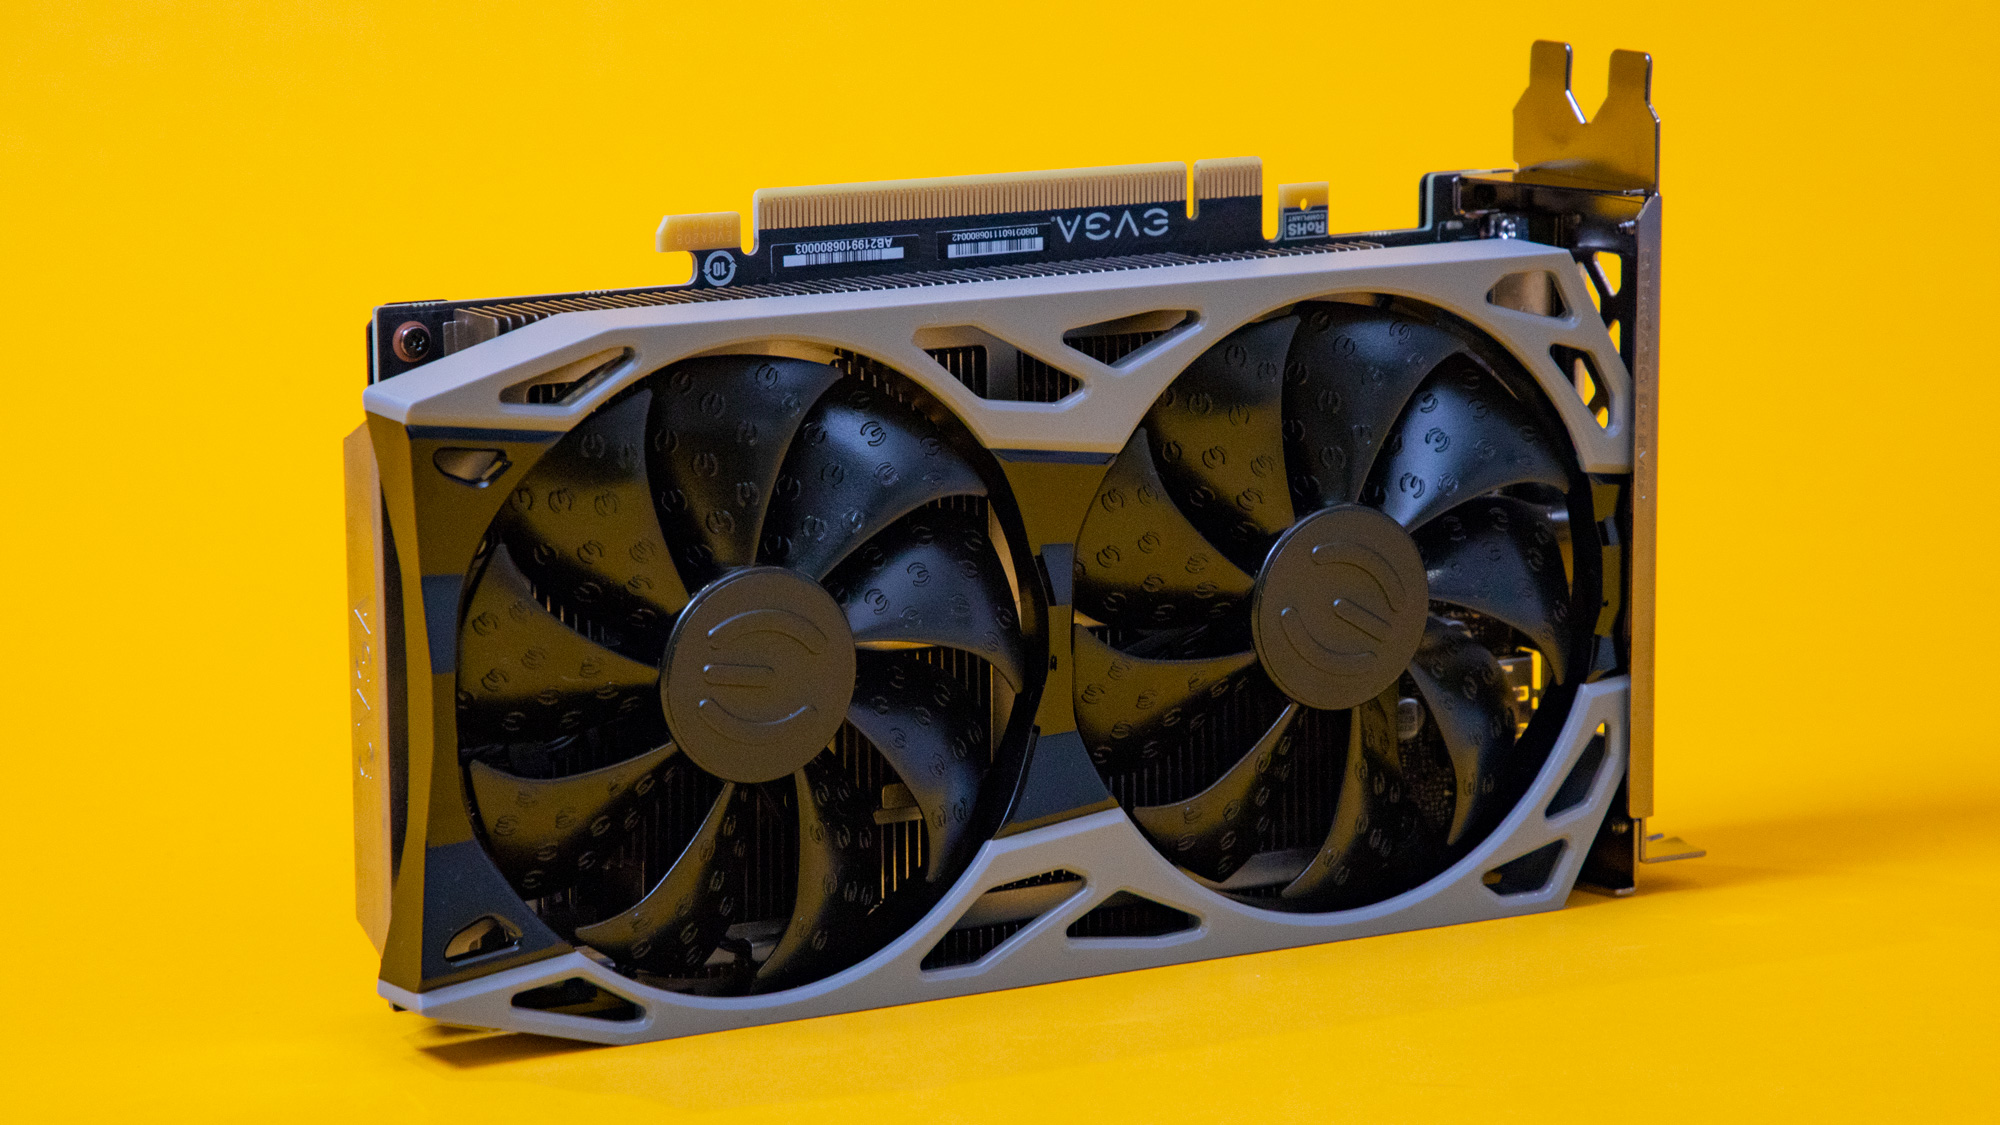 Nvidia GeForce GTX 1660 Super is the best Nvidia graphics card for you, if you're on the budget.